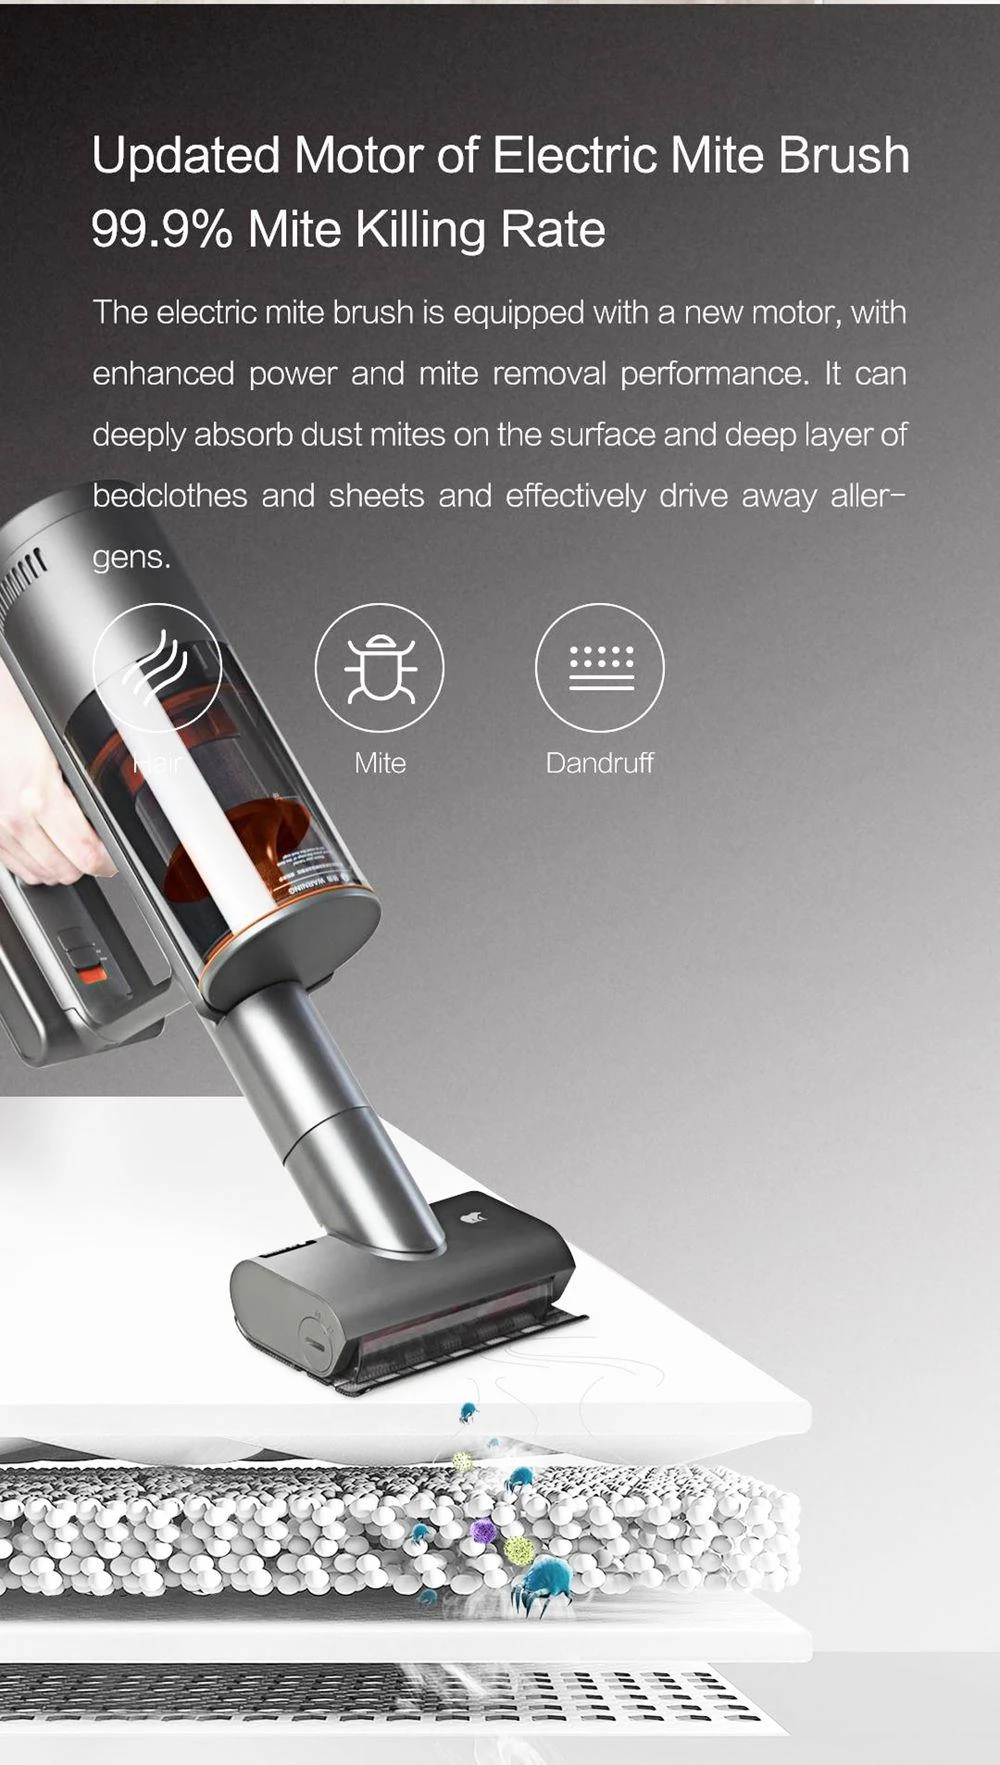 Shunzao Z11 MAX Suction Power 150AW 26000Pa Hand-held Cordlesss Vacuum Cleaner 2500mAh Lithium Battery (EU Version)